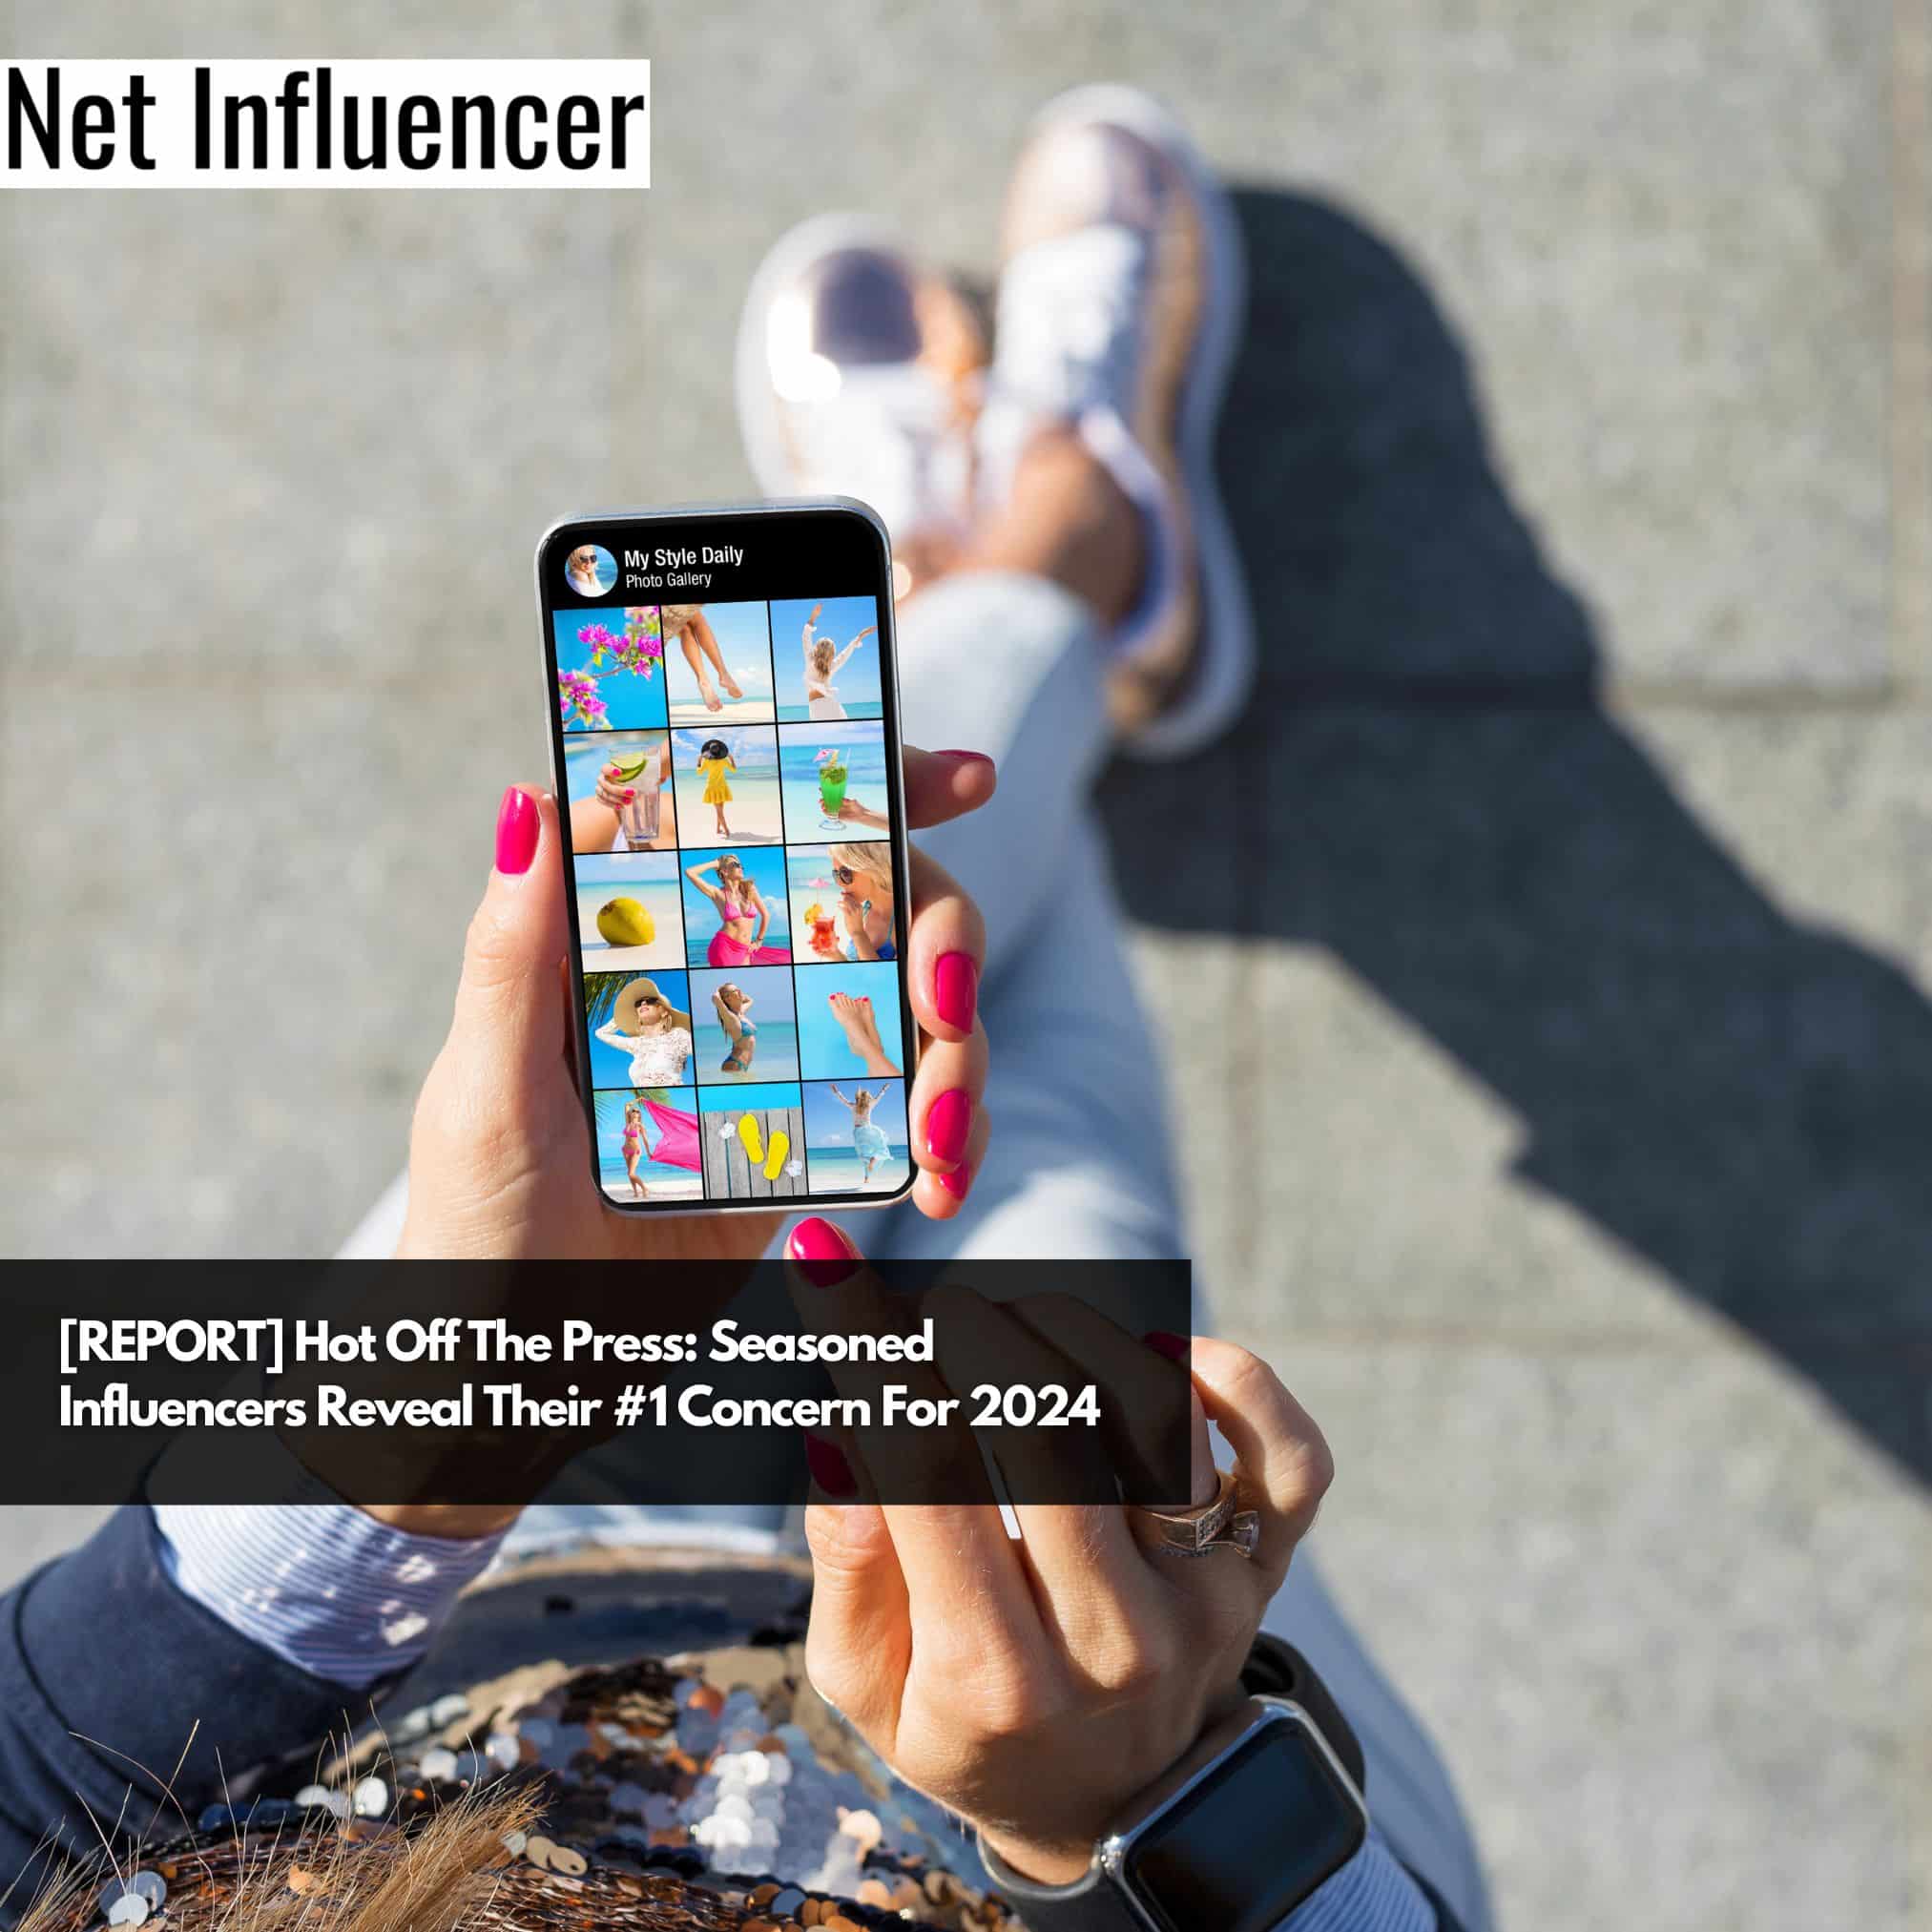 [REPORT] Hot Off The Press Seasoned Influencers Reveal Their #1 Concern For 2024